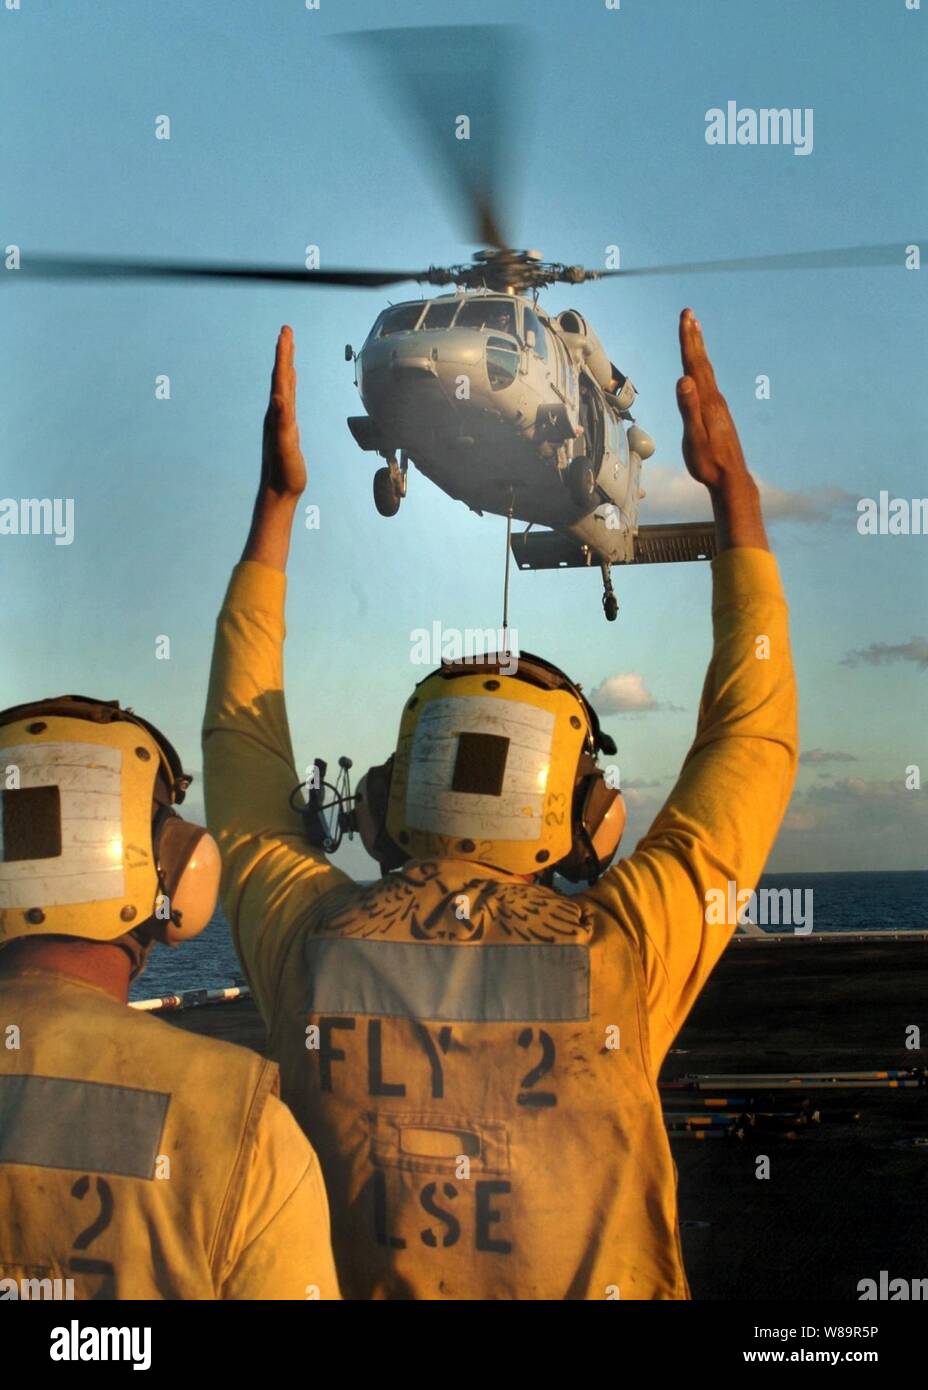 Aviation Boatswains Mate Airman Manuel Romero (right) guides a SH-60 Seahawk helicopter in for a landing aboard the USS Tarawa (LHA 1) while Aviation Boatswains Mate 2nd Class David Zavala looks on during vertical replenishment operations off the coast of San Diego, Calif., on Sept. 22, 2005. Stock Photo